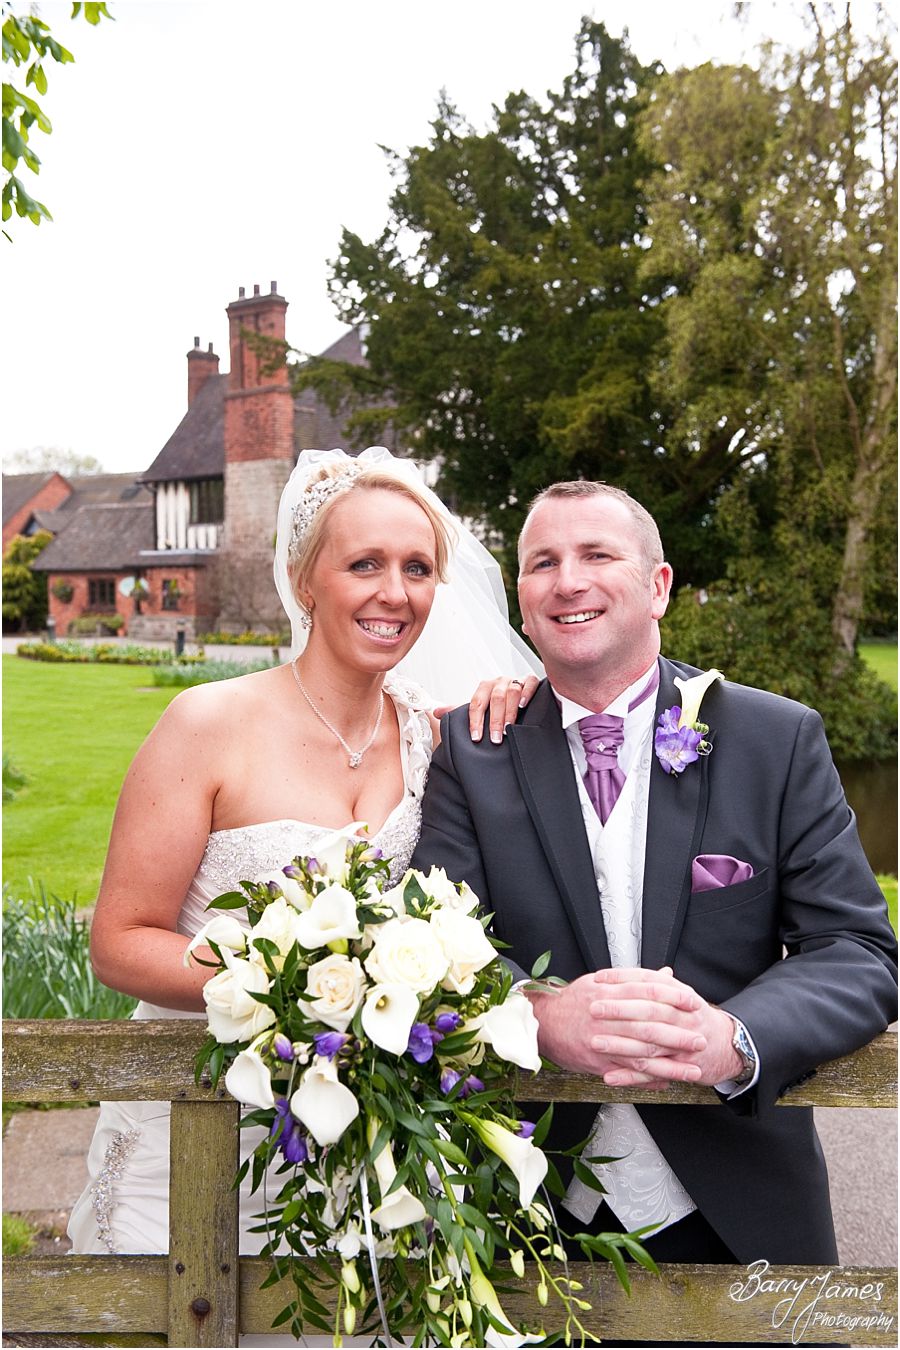 Creative wedding photography at one of Staffordshires Premier Wedding Venues The Moat House in Acton Trussell by Professional Wedding Photographer Barry James